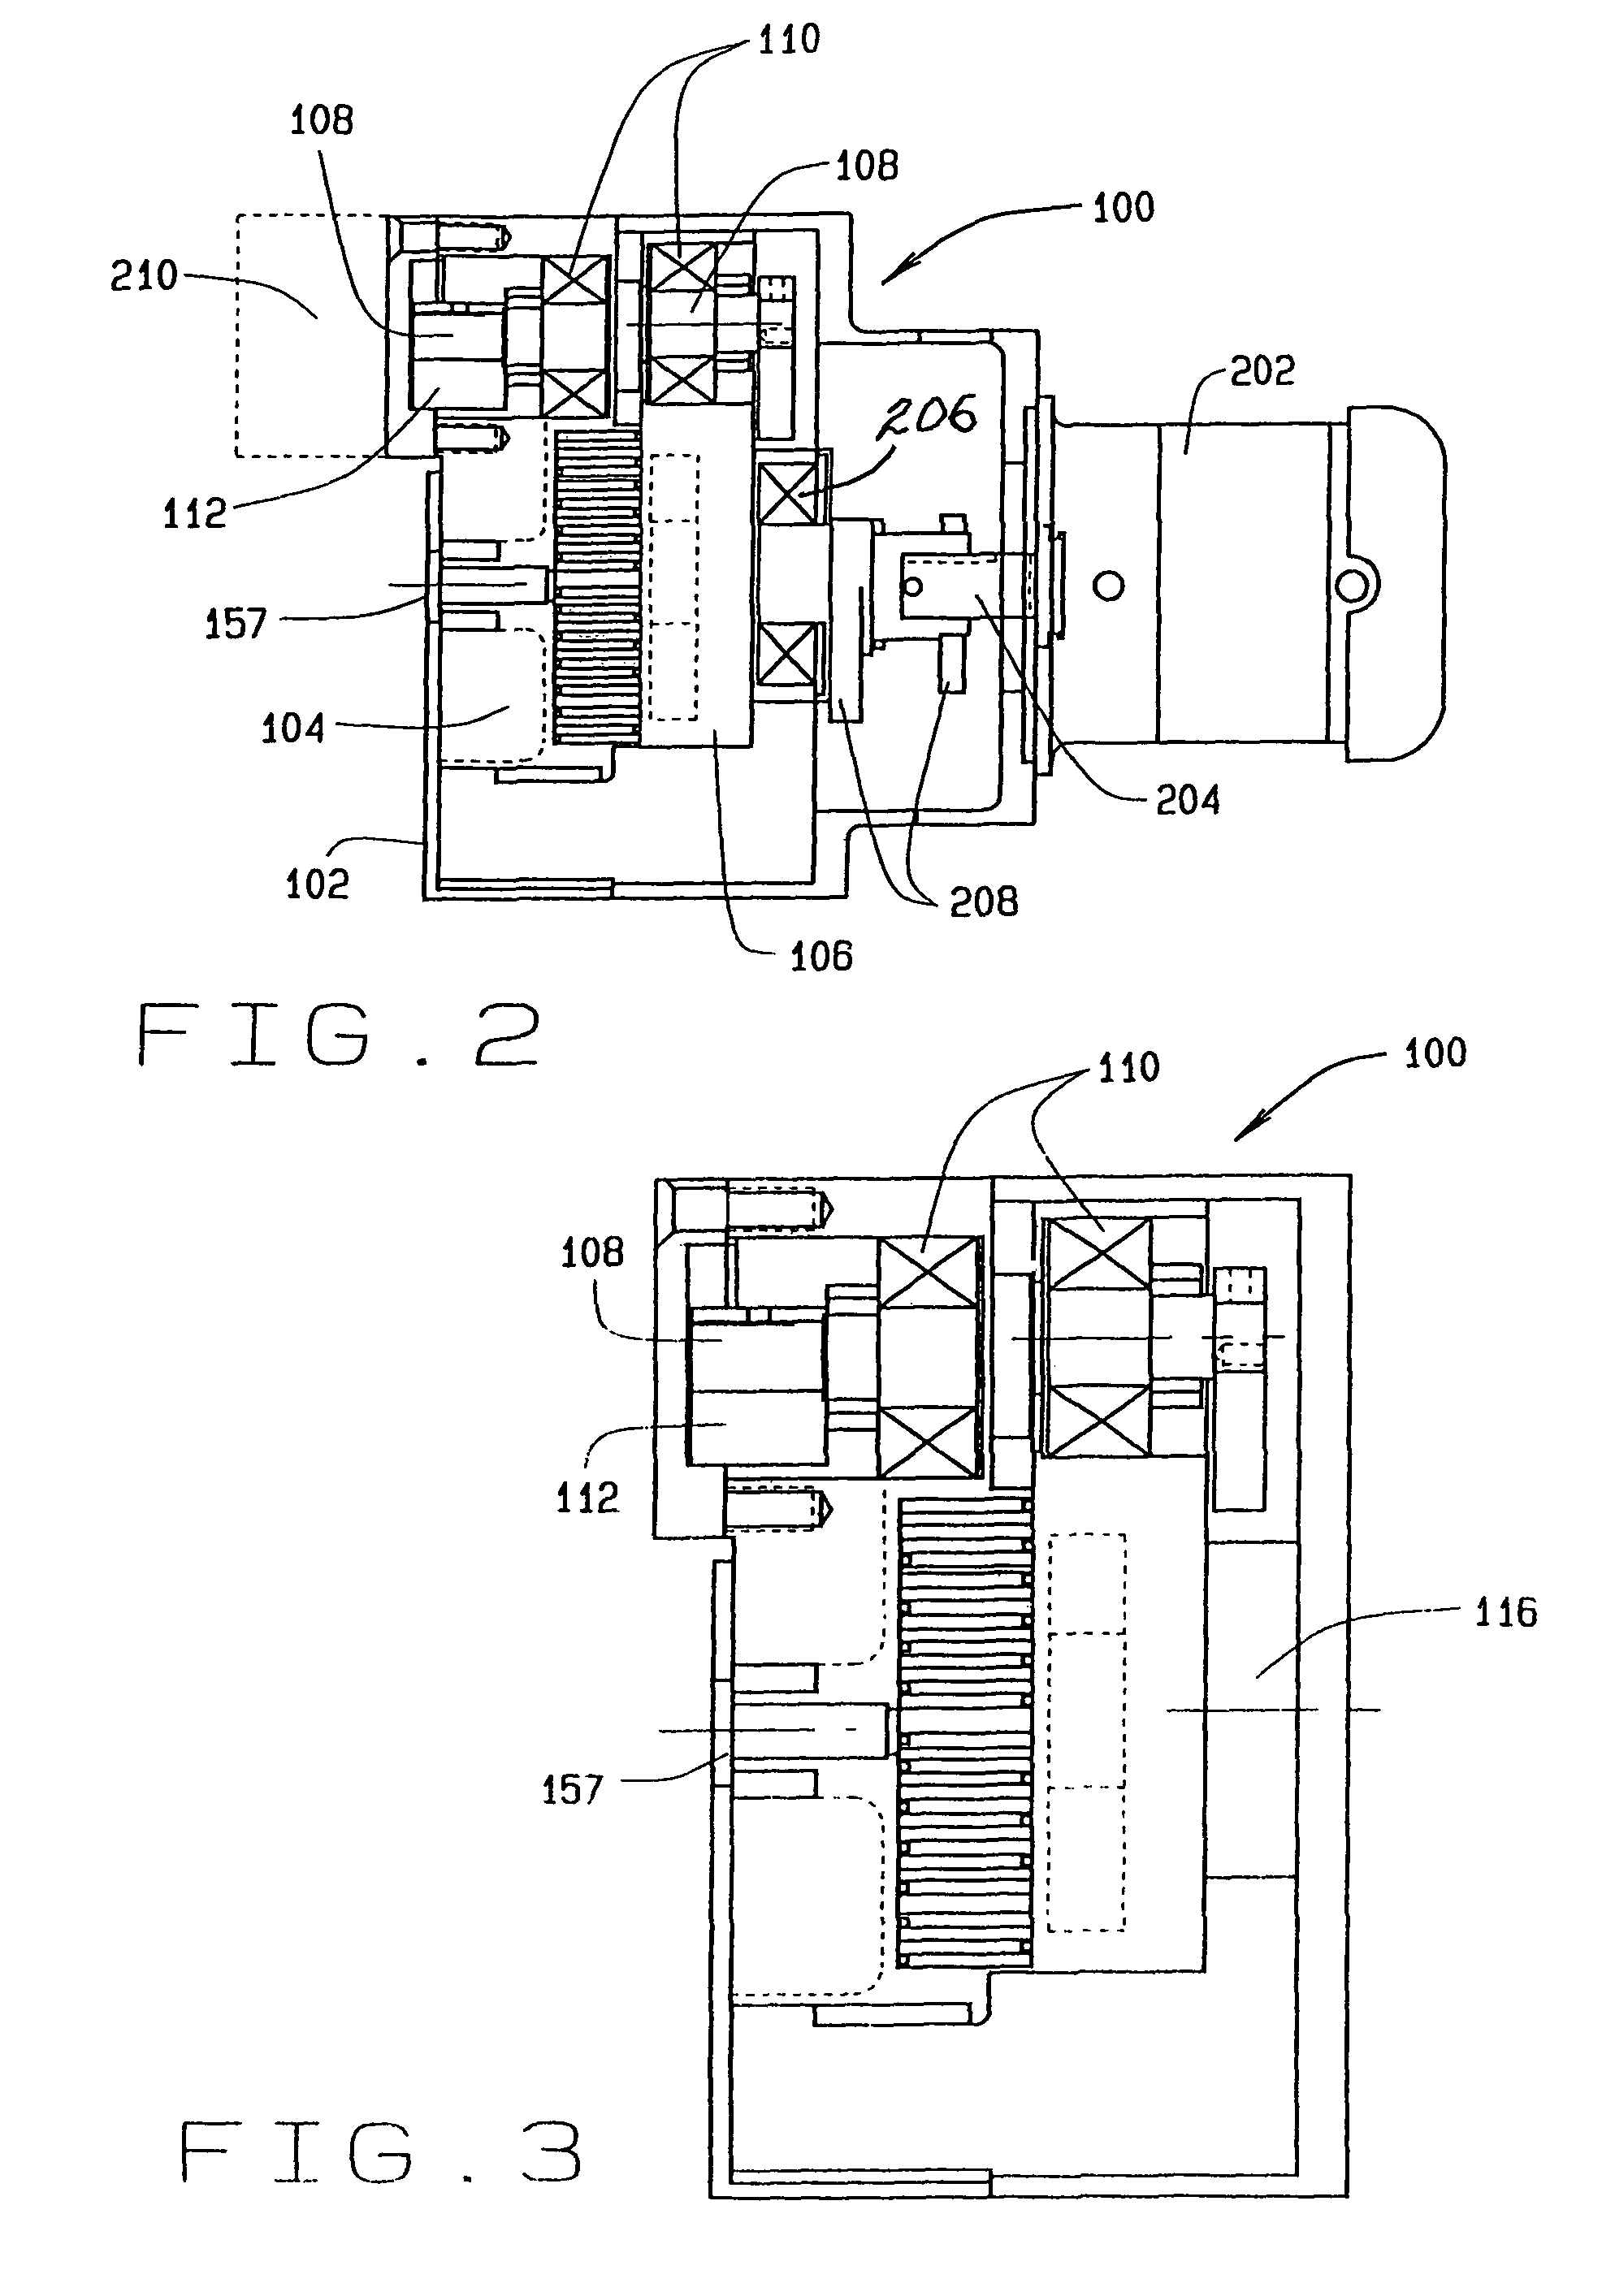 Scroll type device including compressor and expander functions in a single scroll plate pair